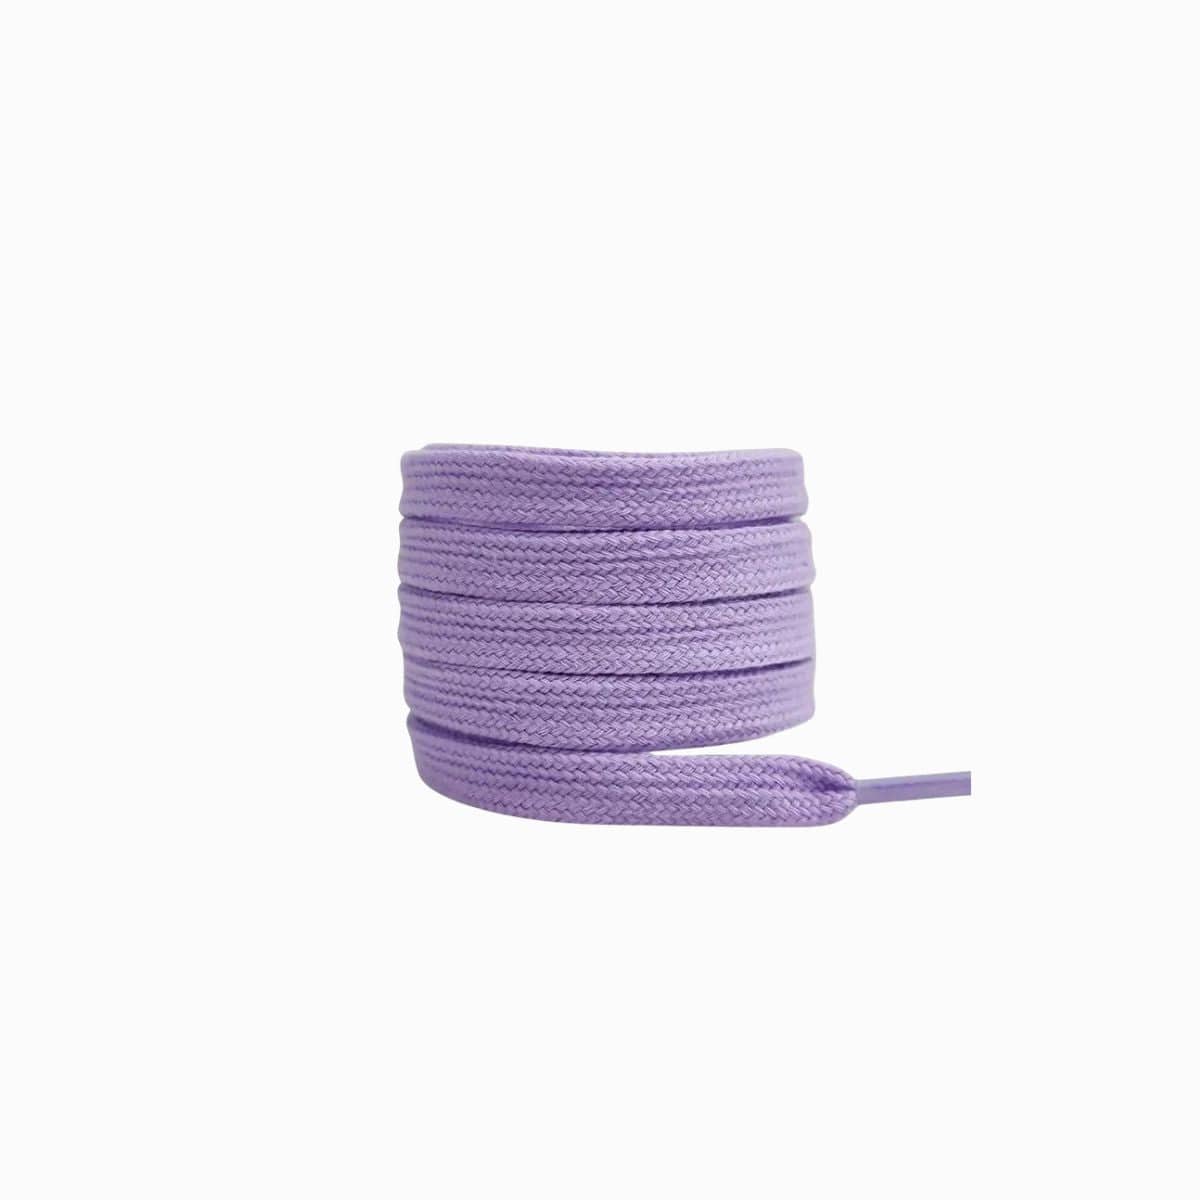 Light Purple Replacement Adidas Shoe Laces for Adidas Samba ADV Sneakers by Kicks Shoelaces